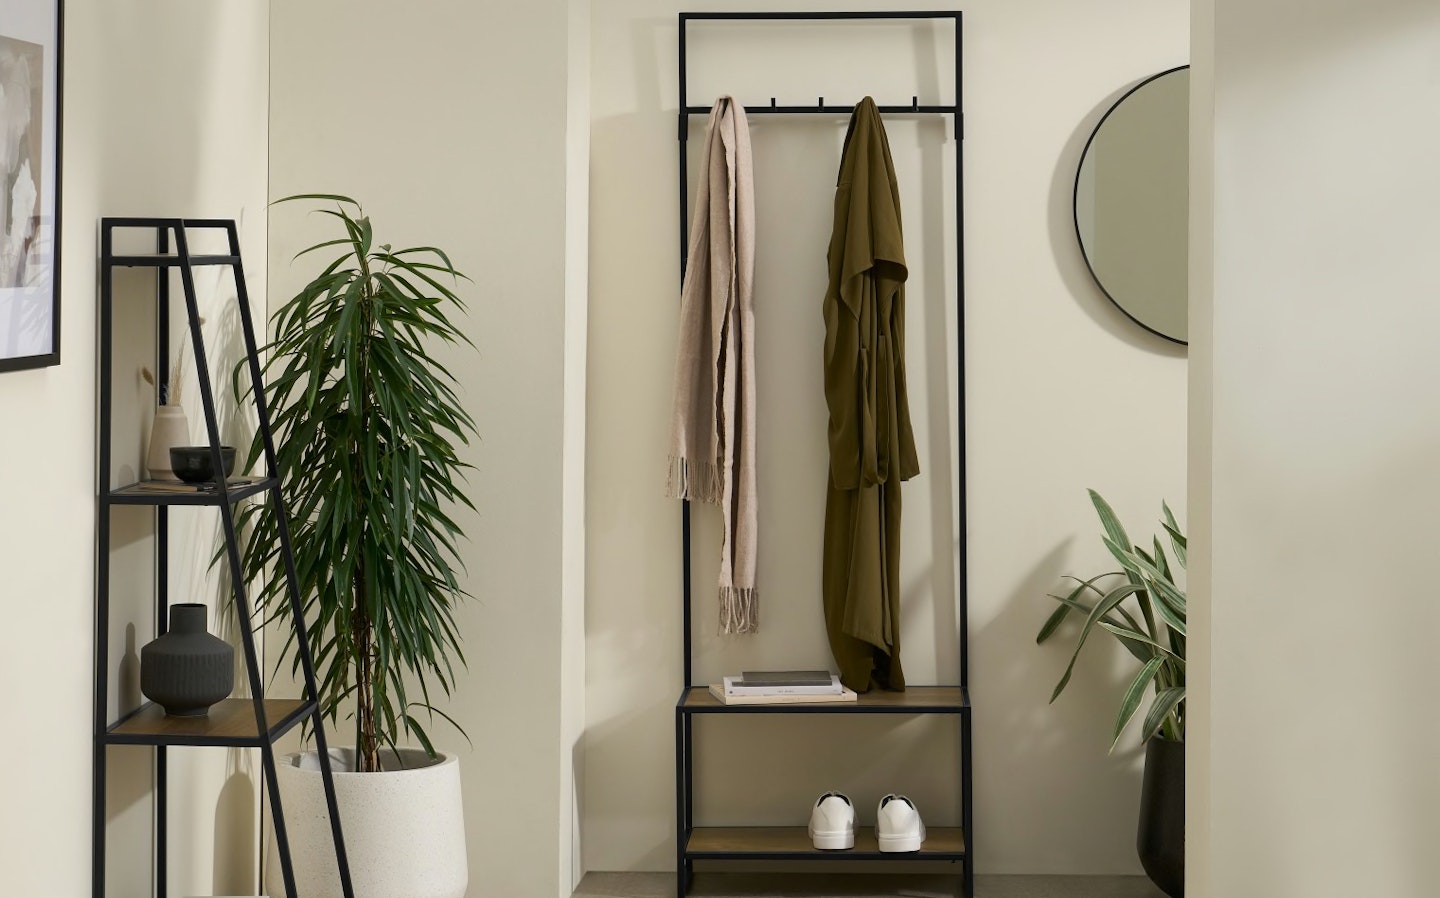 21 Uses for a Wire Coat Hanger : 21 Steps (with Pictures